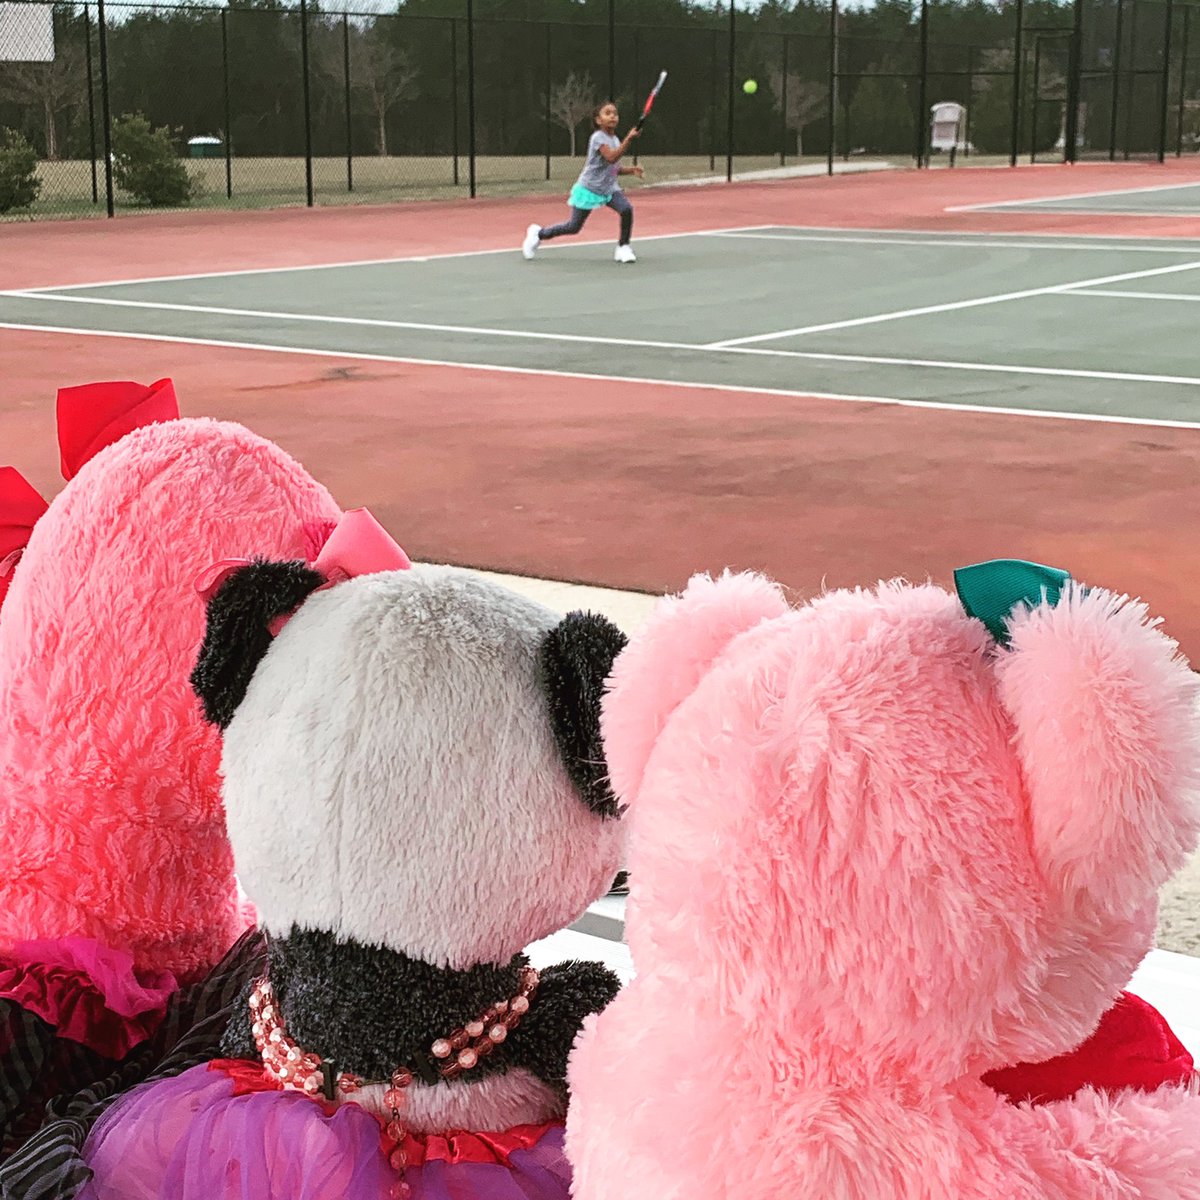 I love the fact that she likes being a little girl. Leila never leaves home without her babies. #brownbeauty #beautifullyblended #tennislove #tennislife #athlete #herstuffedbabies #usta #ustasouthern #headambassador #shesonly8 #leilagarrisonhunter